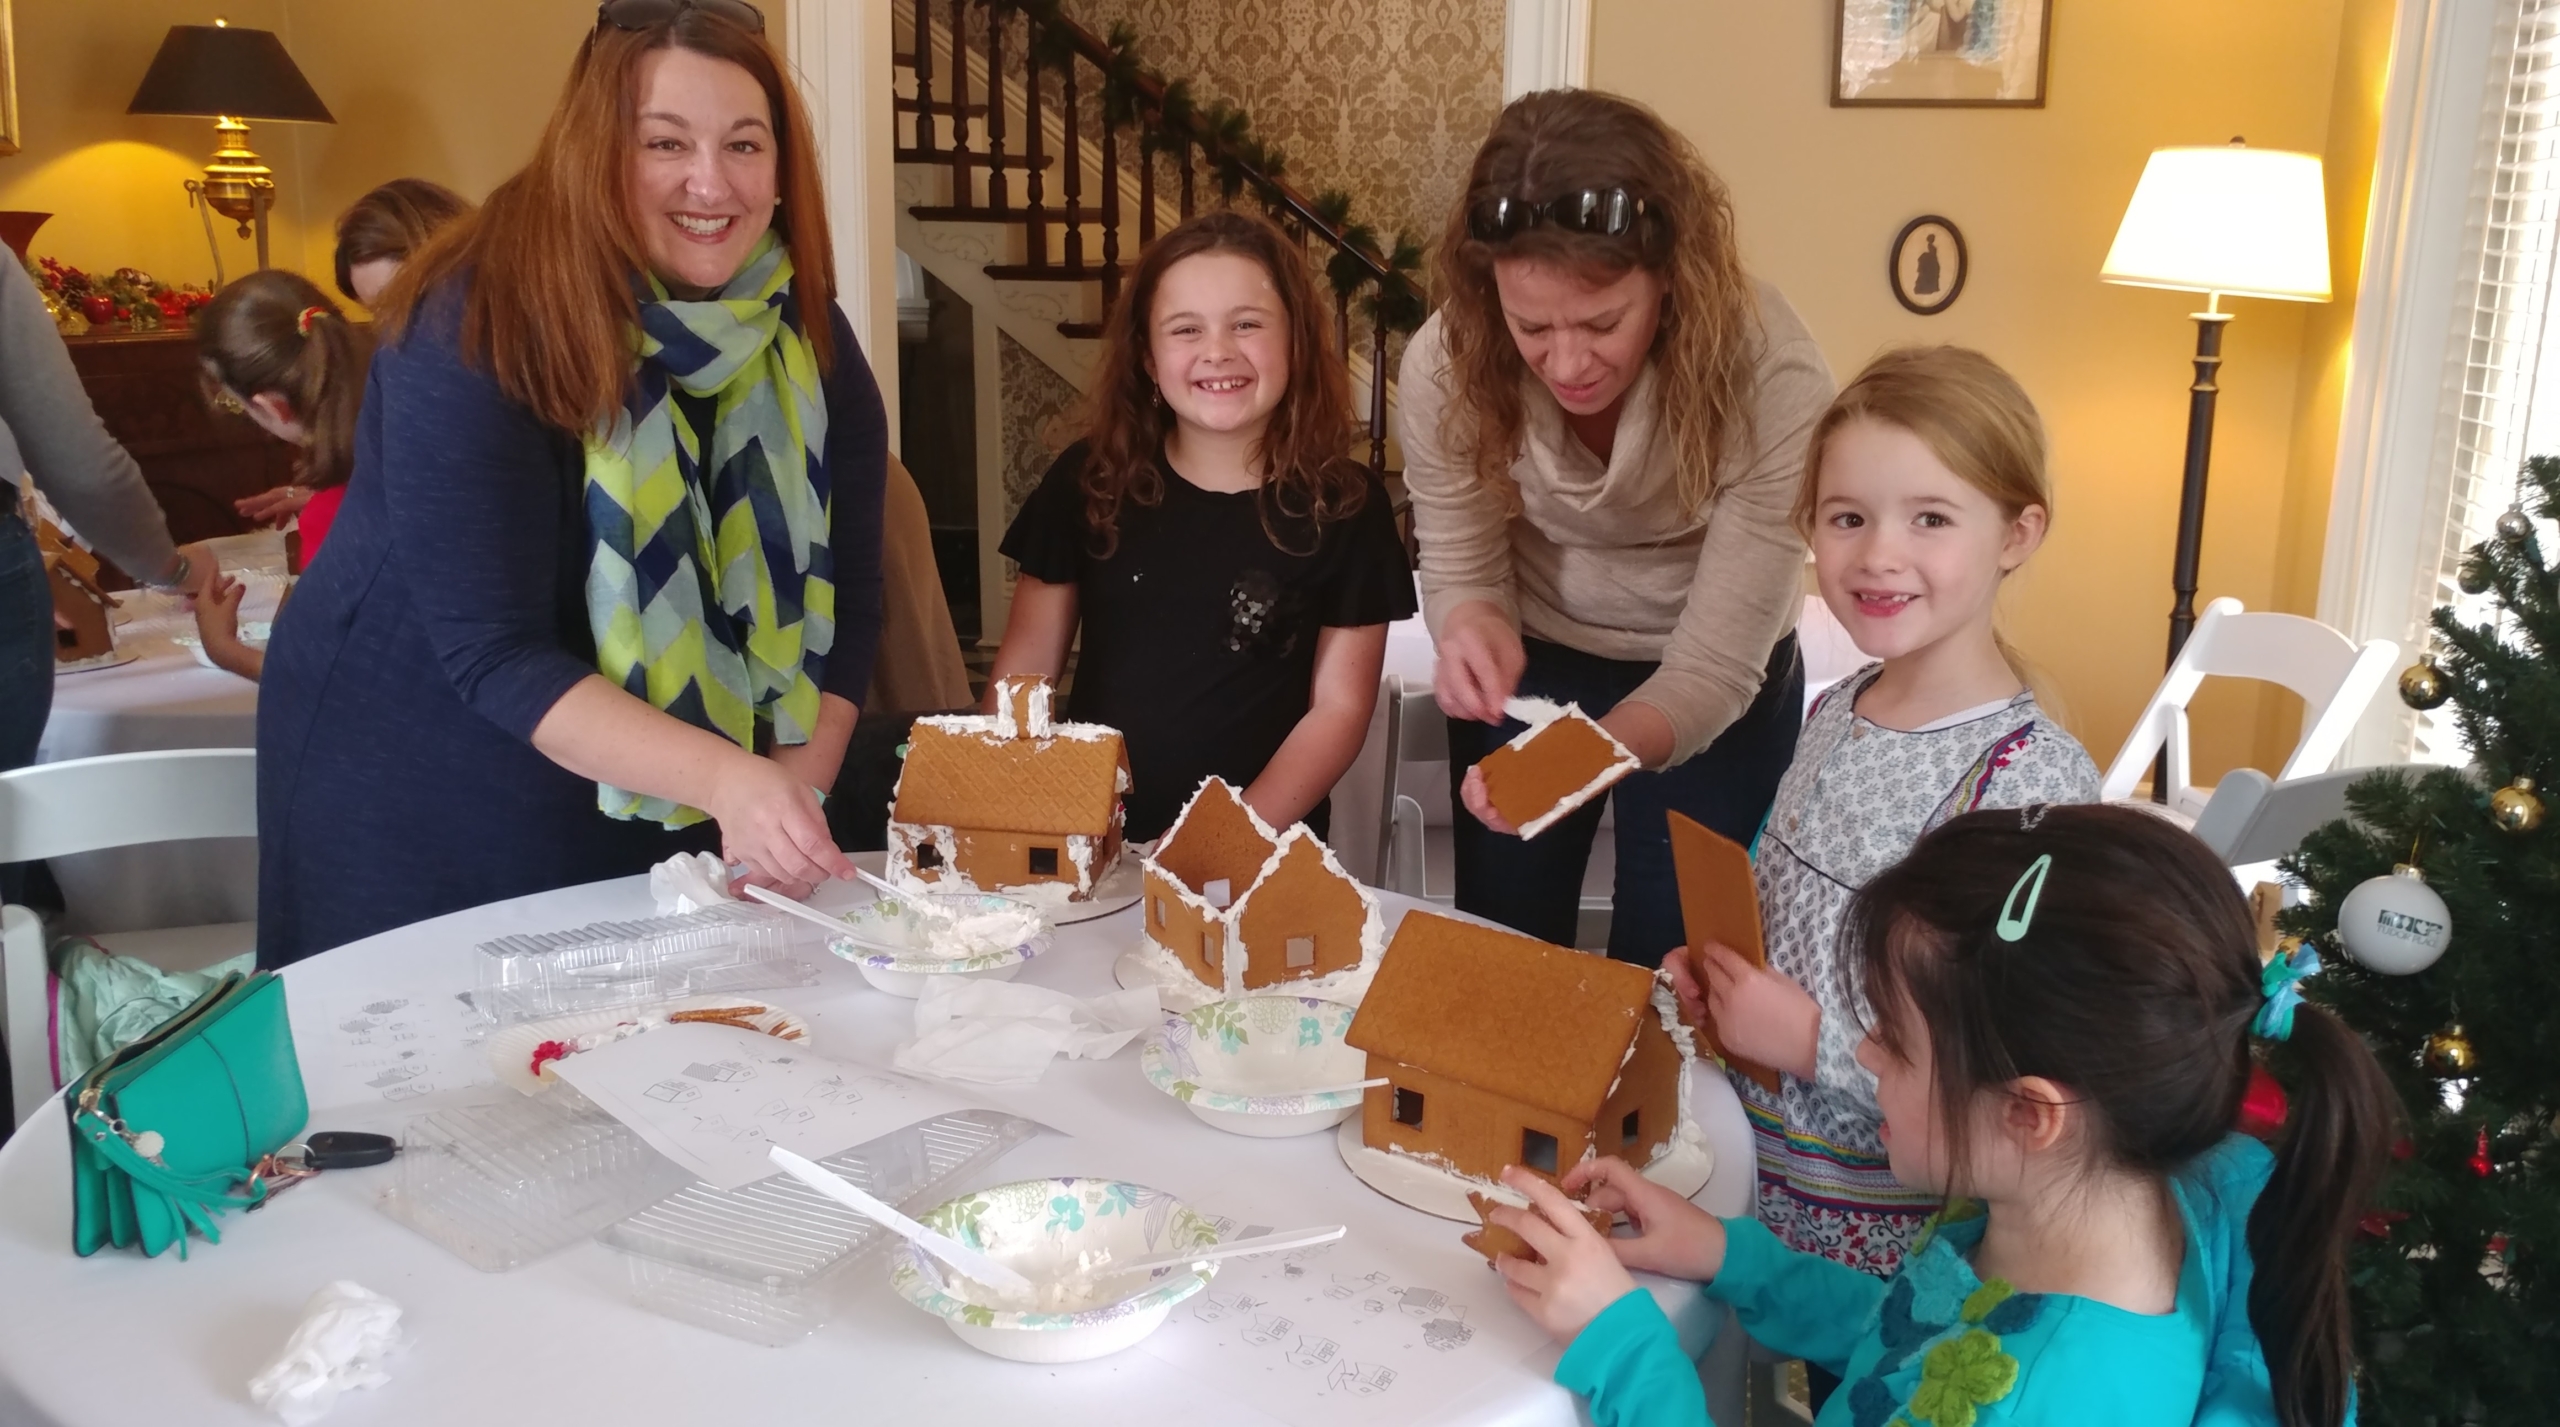 Mothers with children actively building gingerbread house